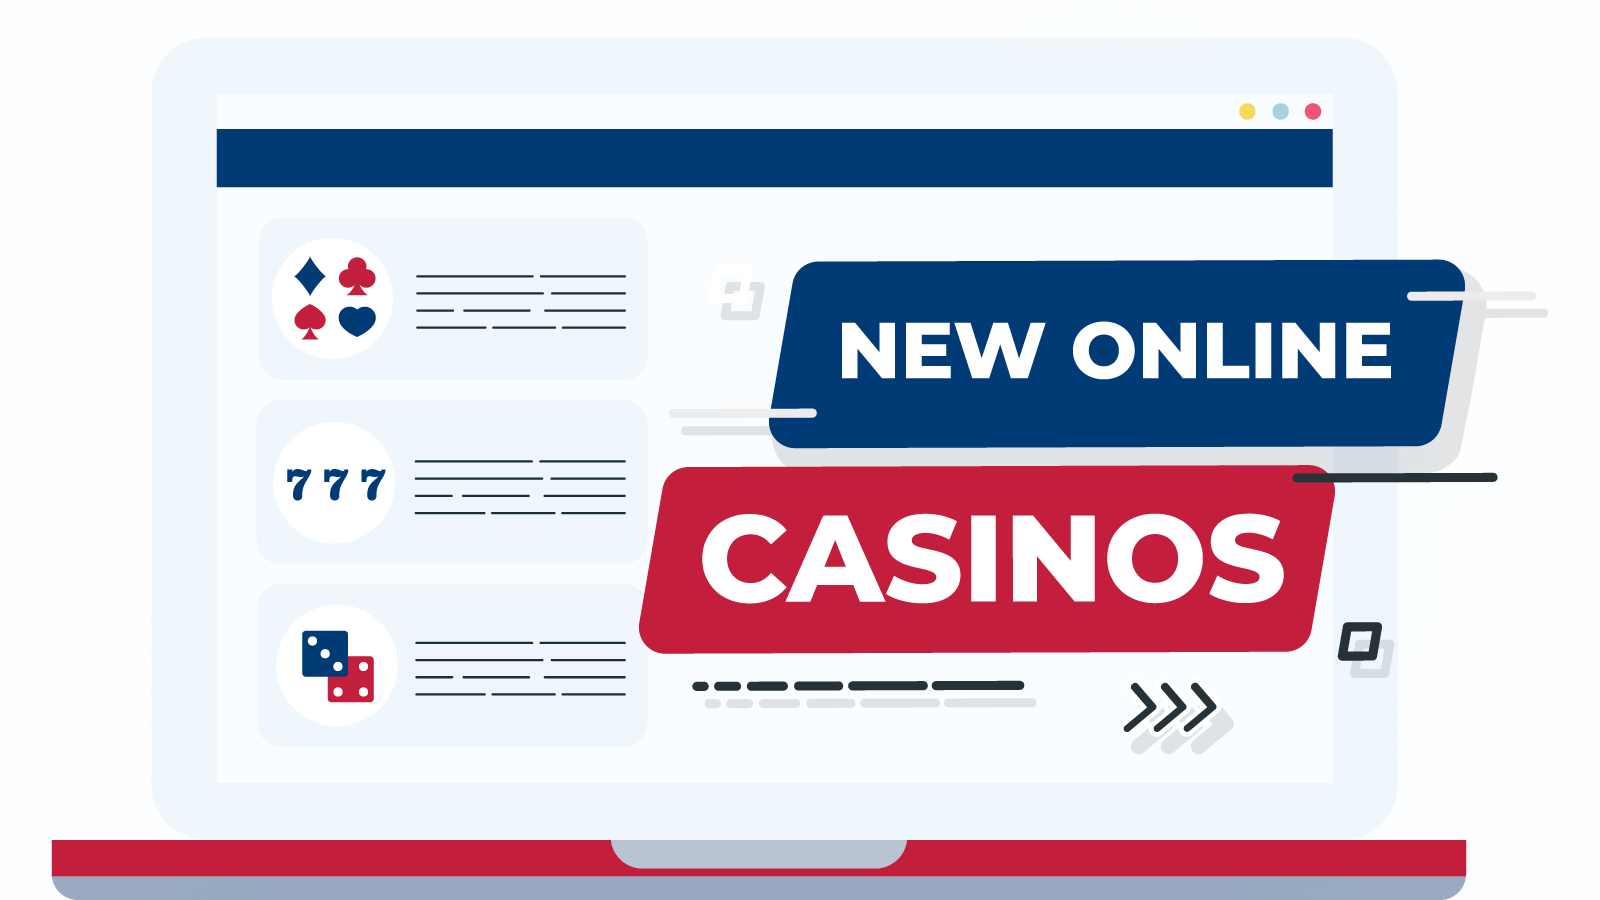 20 Myths About real online casino in 2021